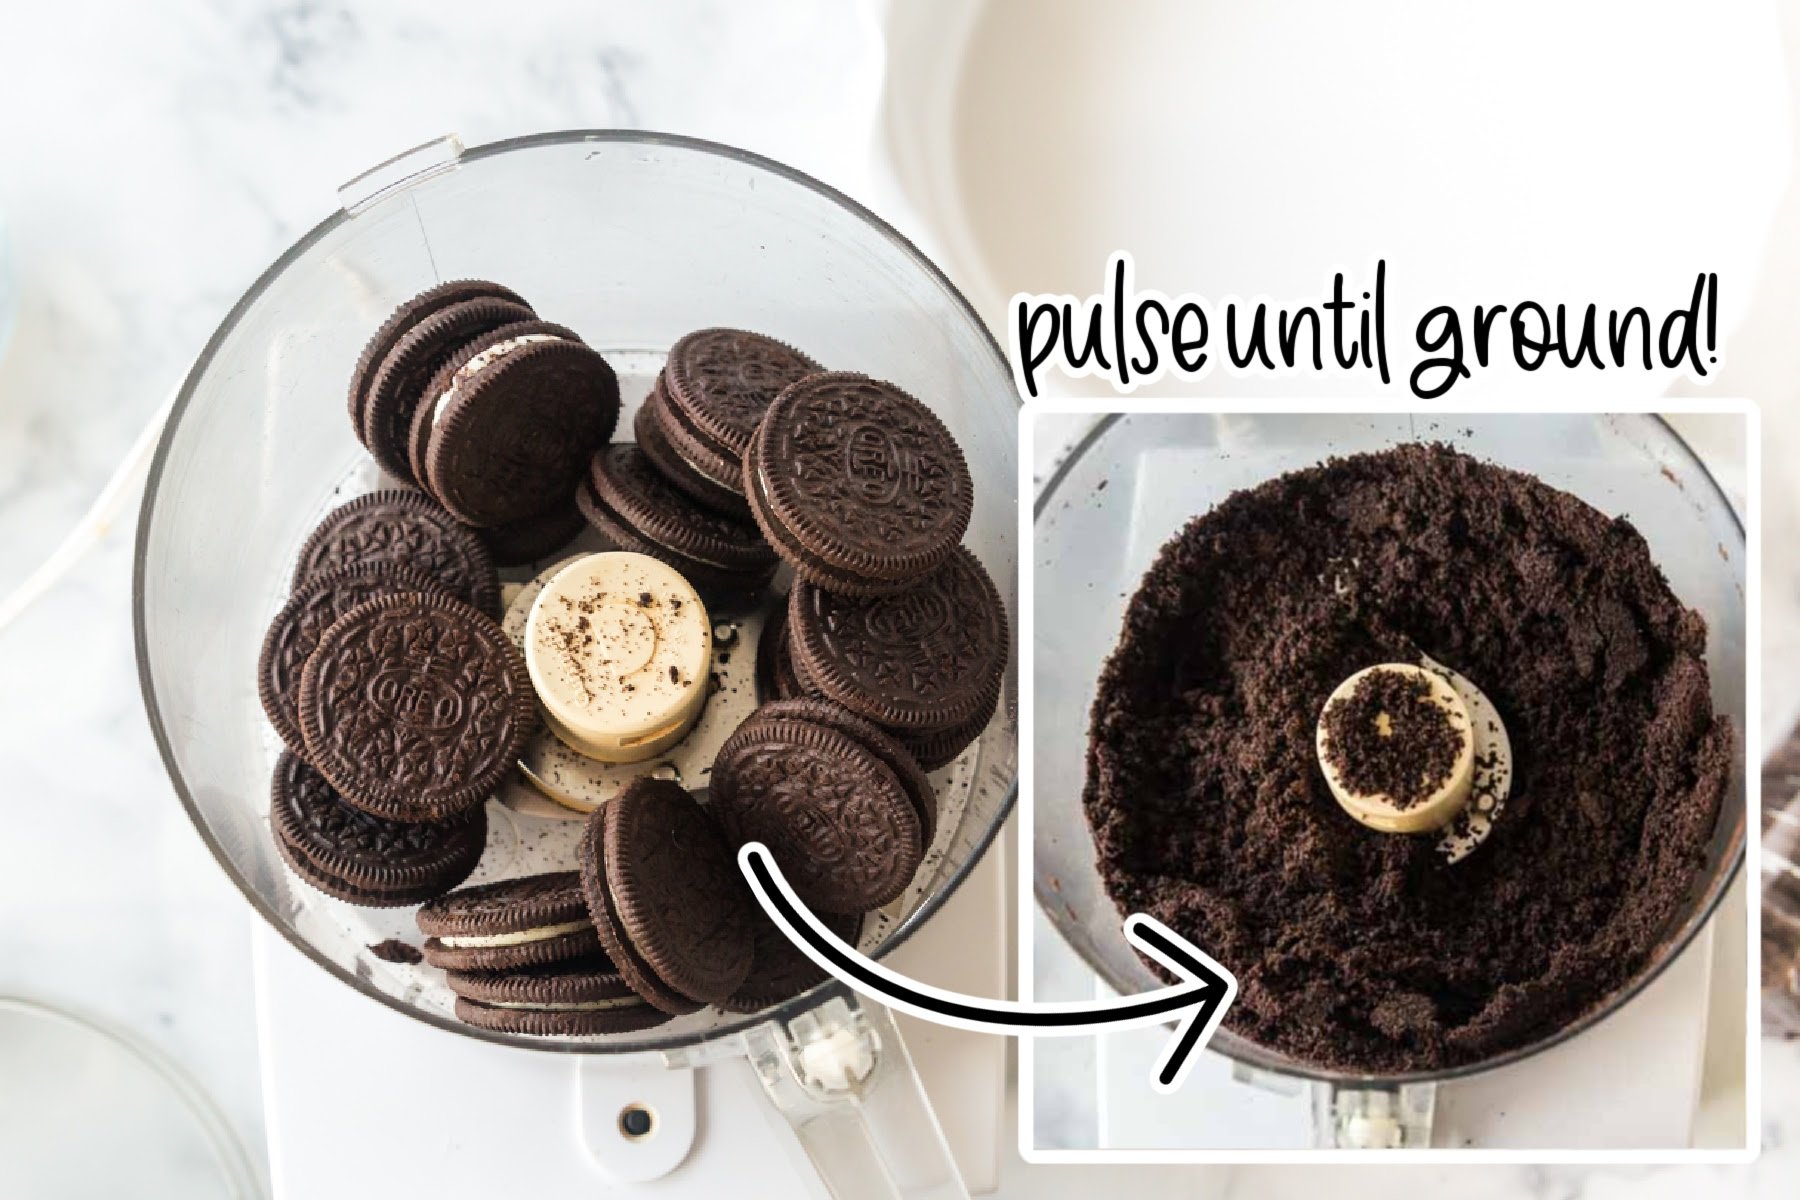 Oreo cookies in bowl of food processor and crushed to a powder in bowl of food processor with text "pulse until ground."